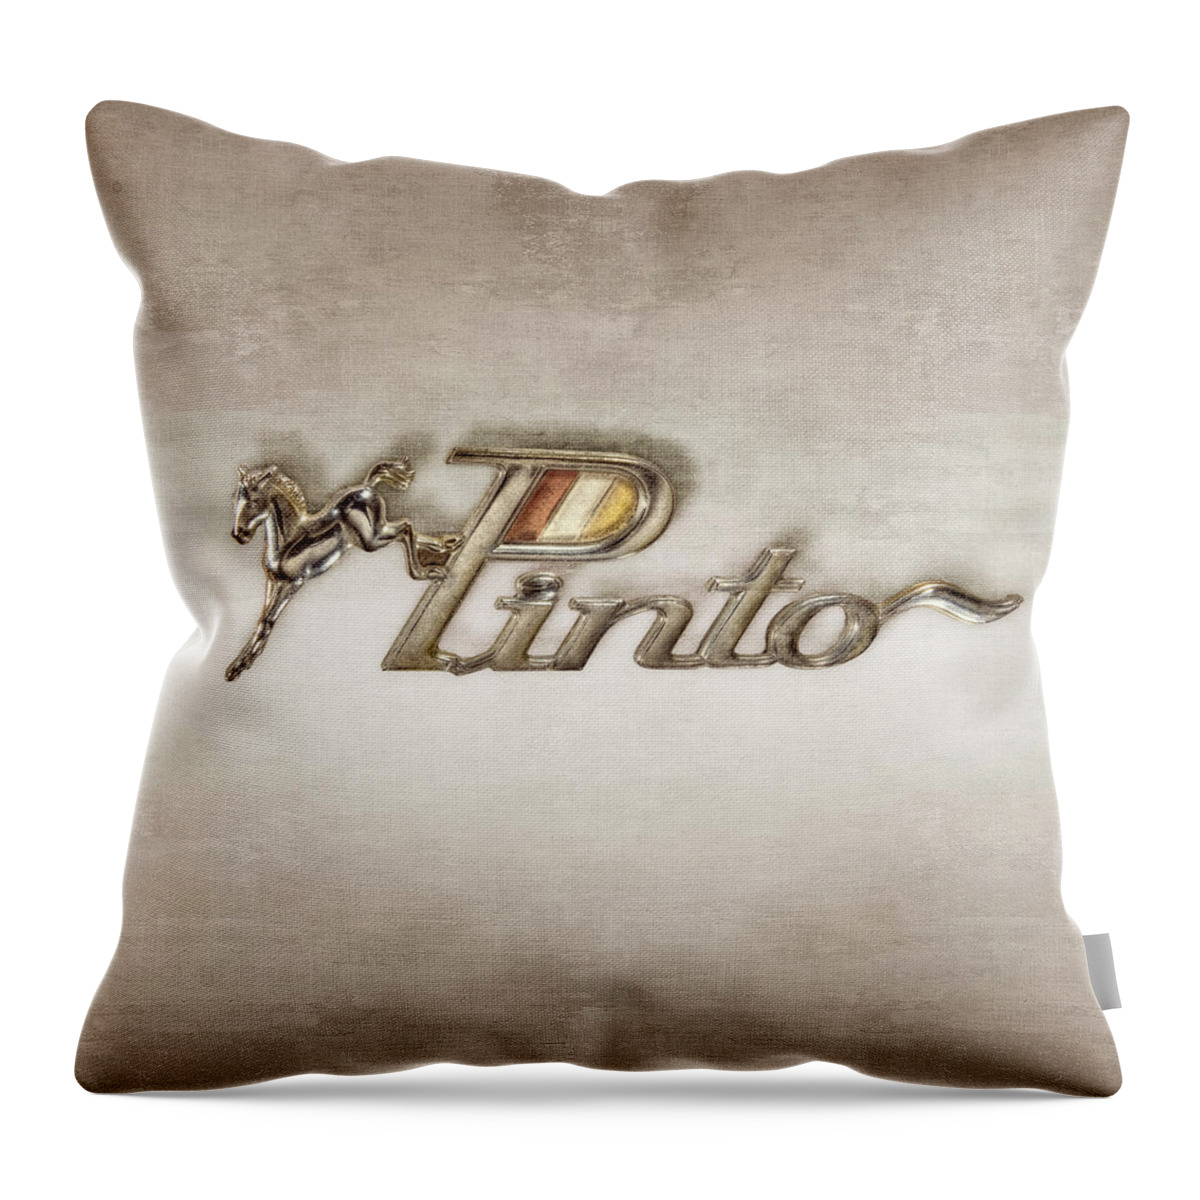 Automotive Throw Pillow featuring the photograph Pinto Car Badge by YoPedro